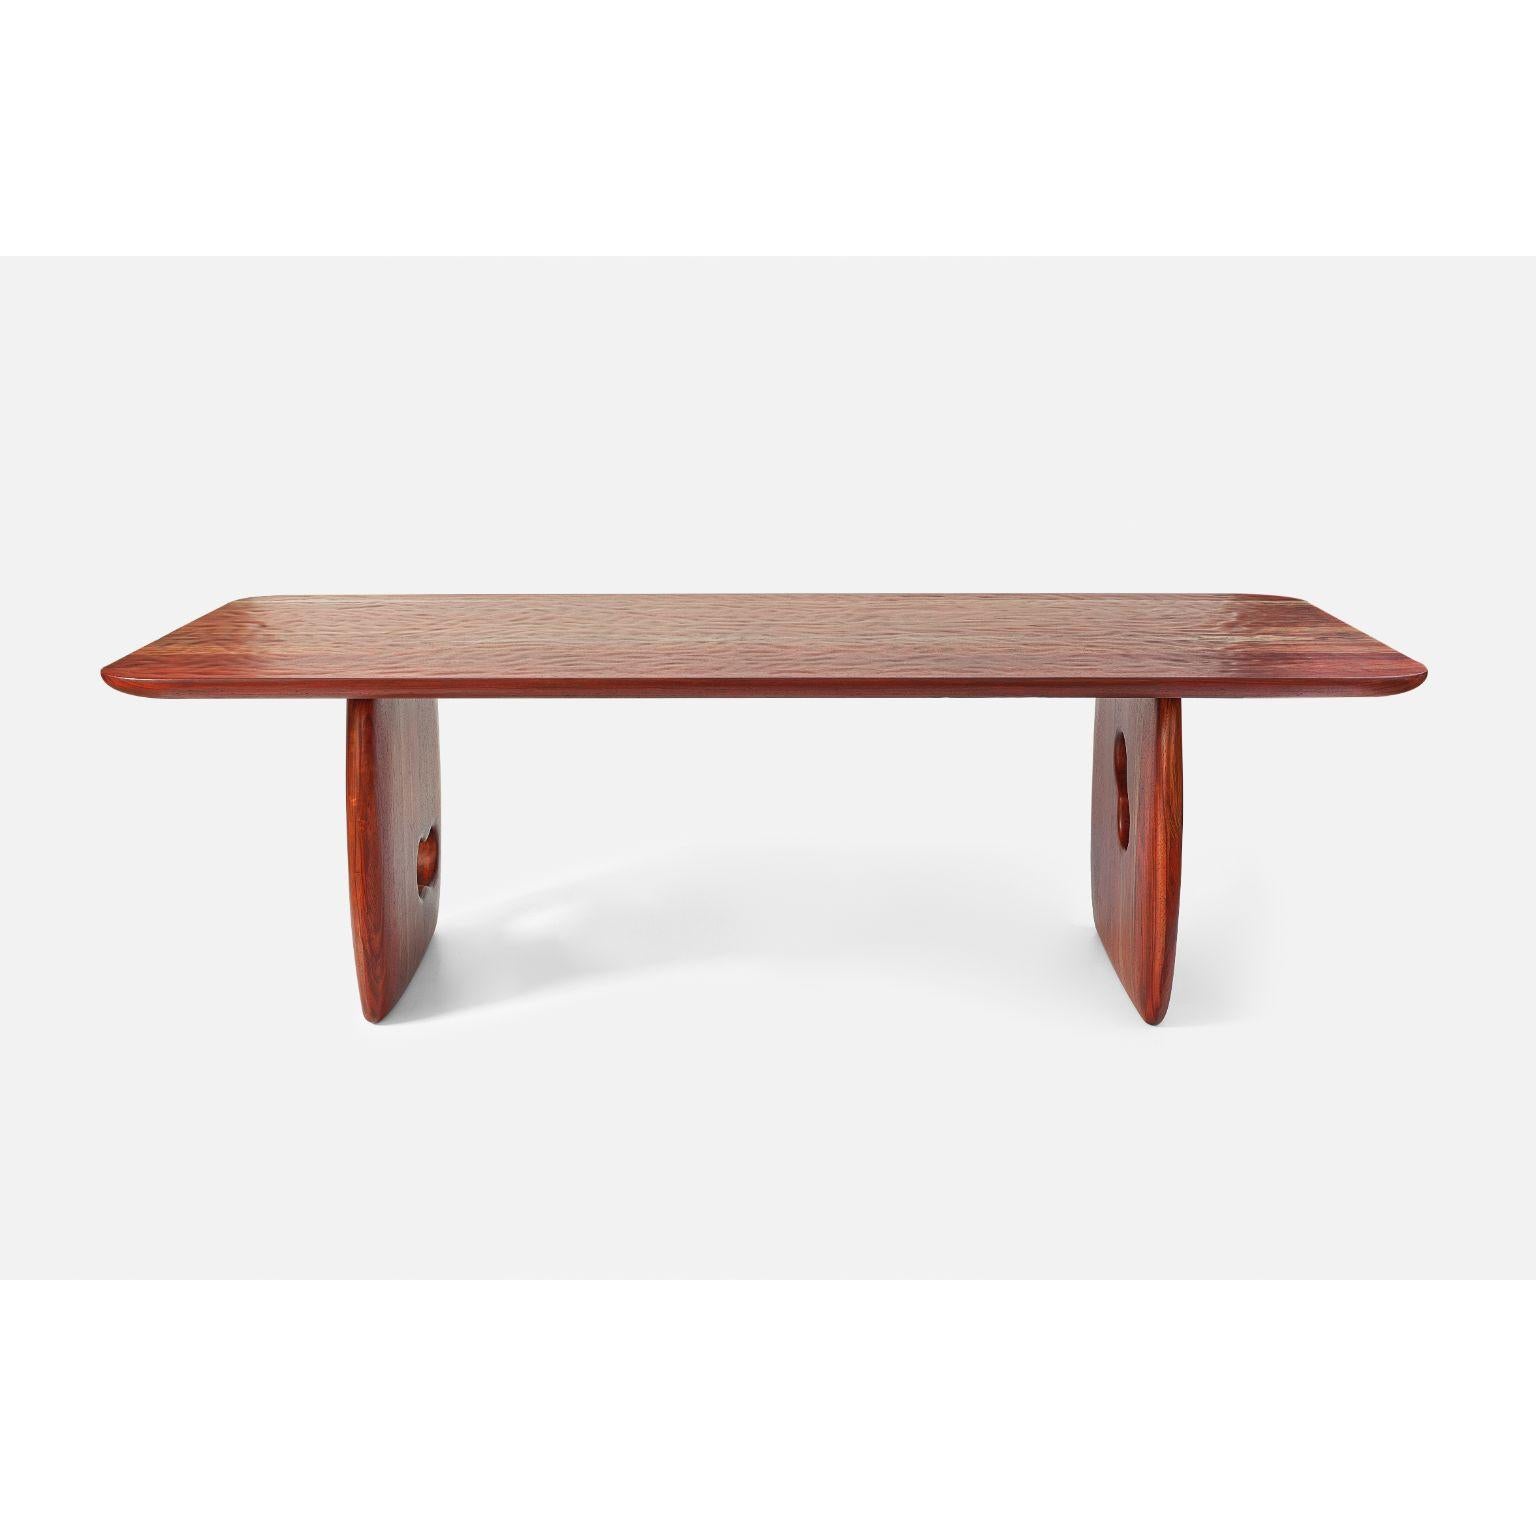 Gauras Dining Table M by Contemporary Ecowood
Dimensions: W 105 x D 240 x H 75 cm.
Materials: African Rosewood.
Color: Natural

Contemporary Ecowood’s story began in a craft workshop in 2009. Our wood passion made us focus on fallen trees in the